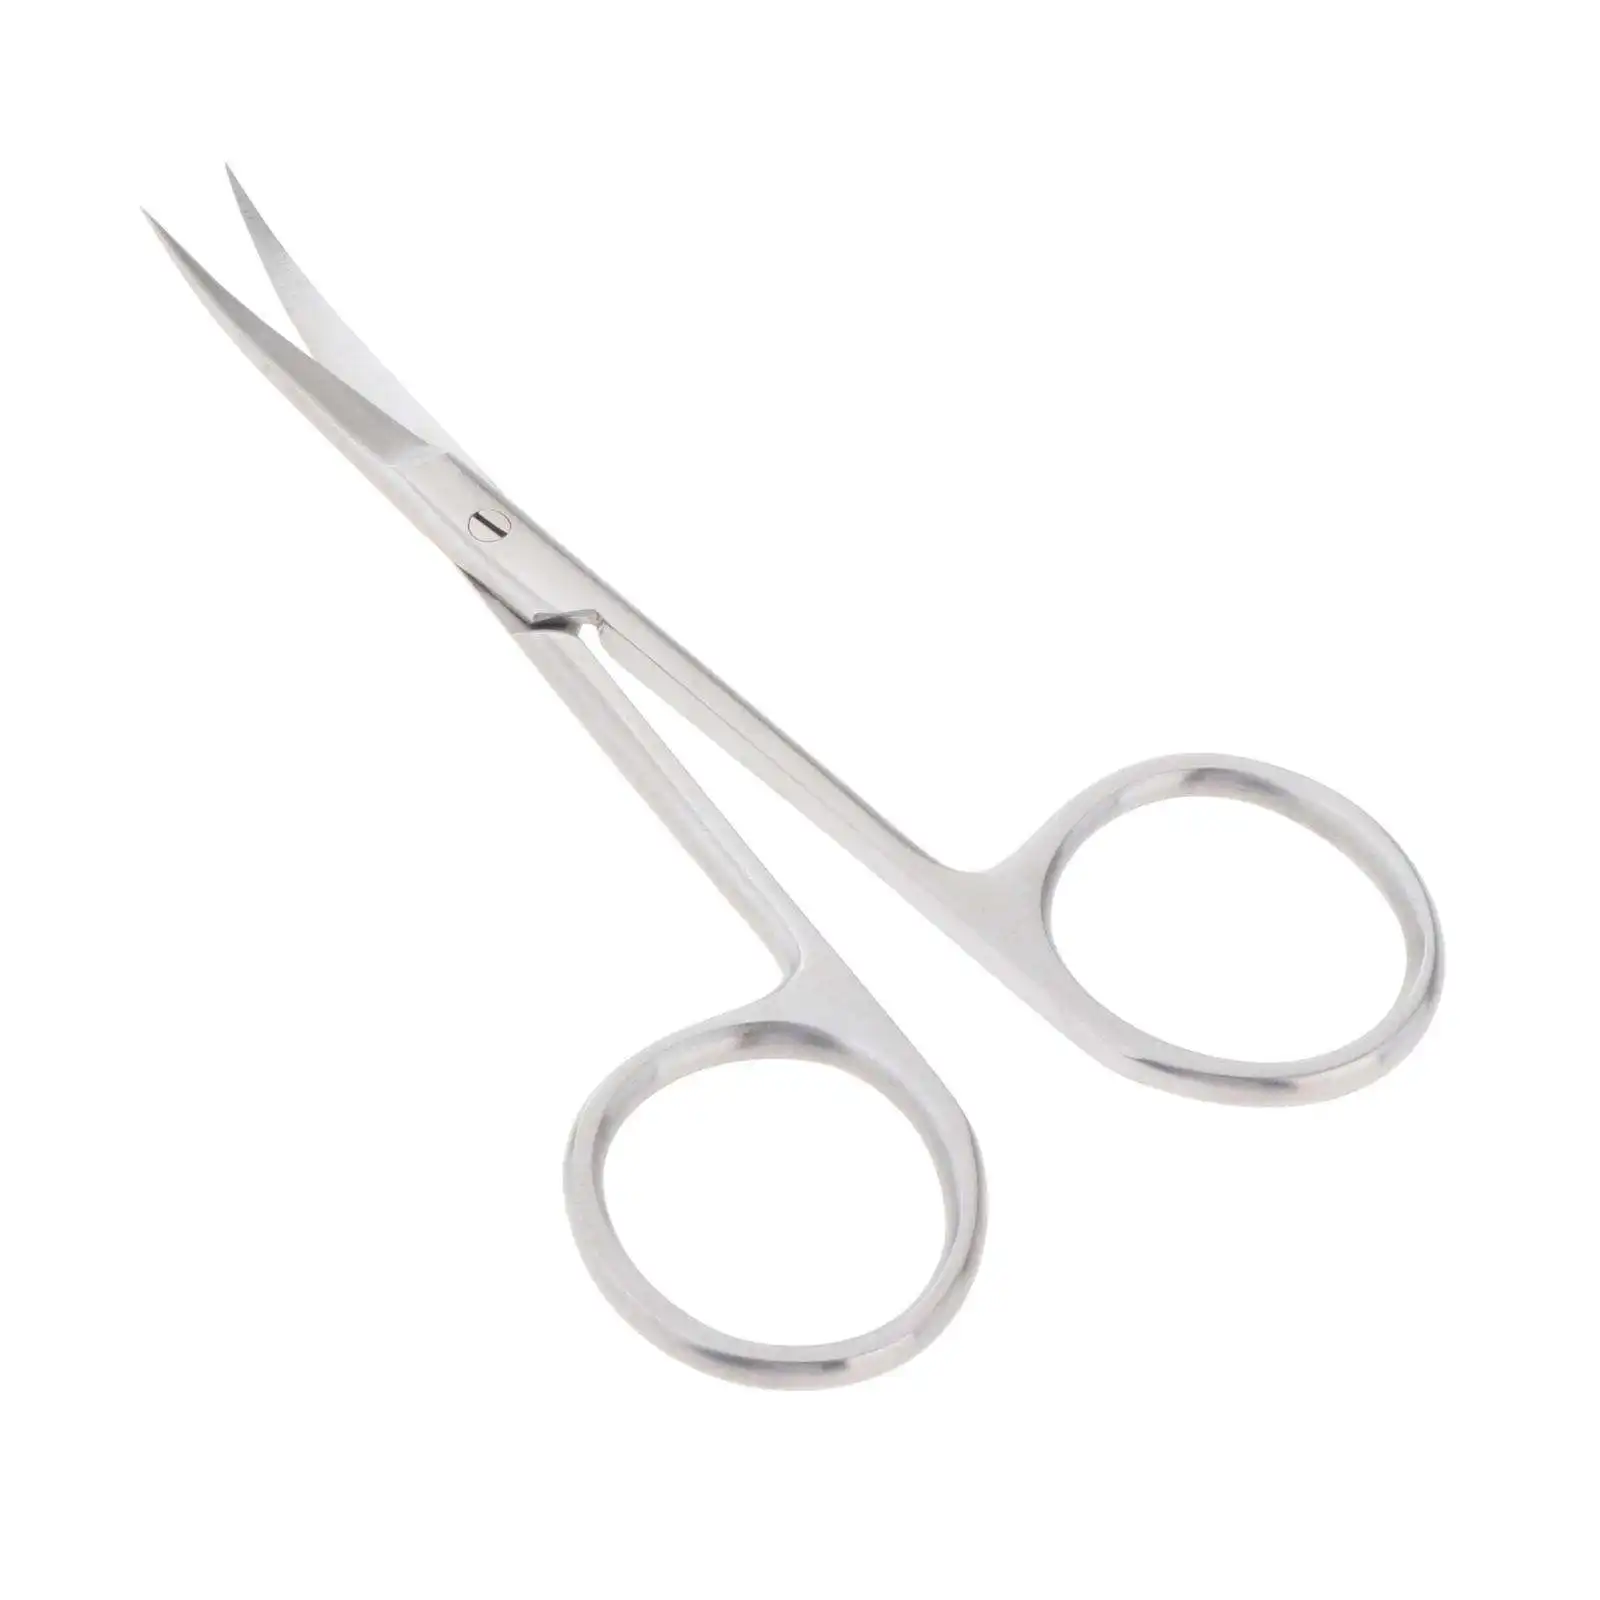 Cuticle Scissors Portable Multi-Purpose Curved Grooming Tool Trimming Scissors for Eyelashes Ear Hair Mustache Pedicure Hotel